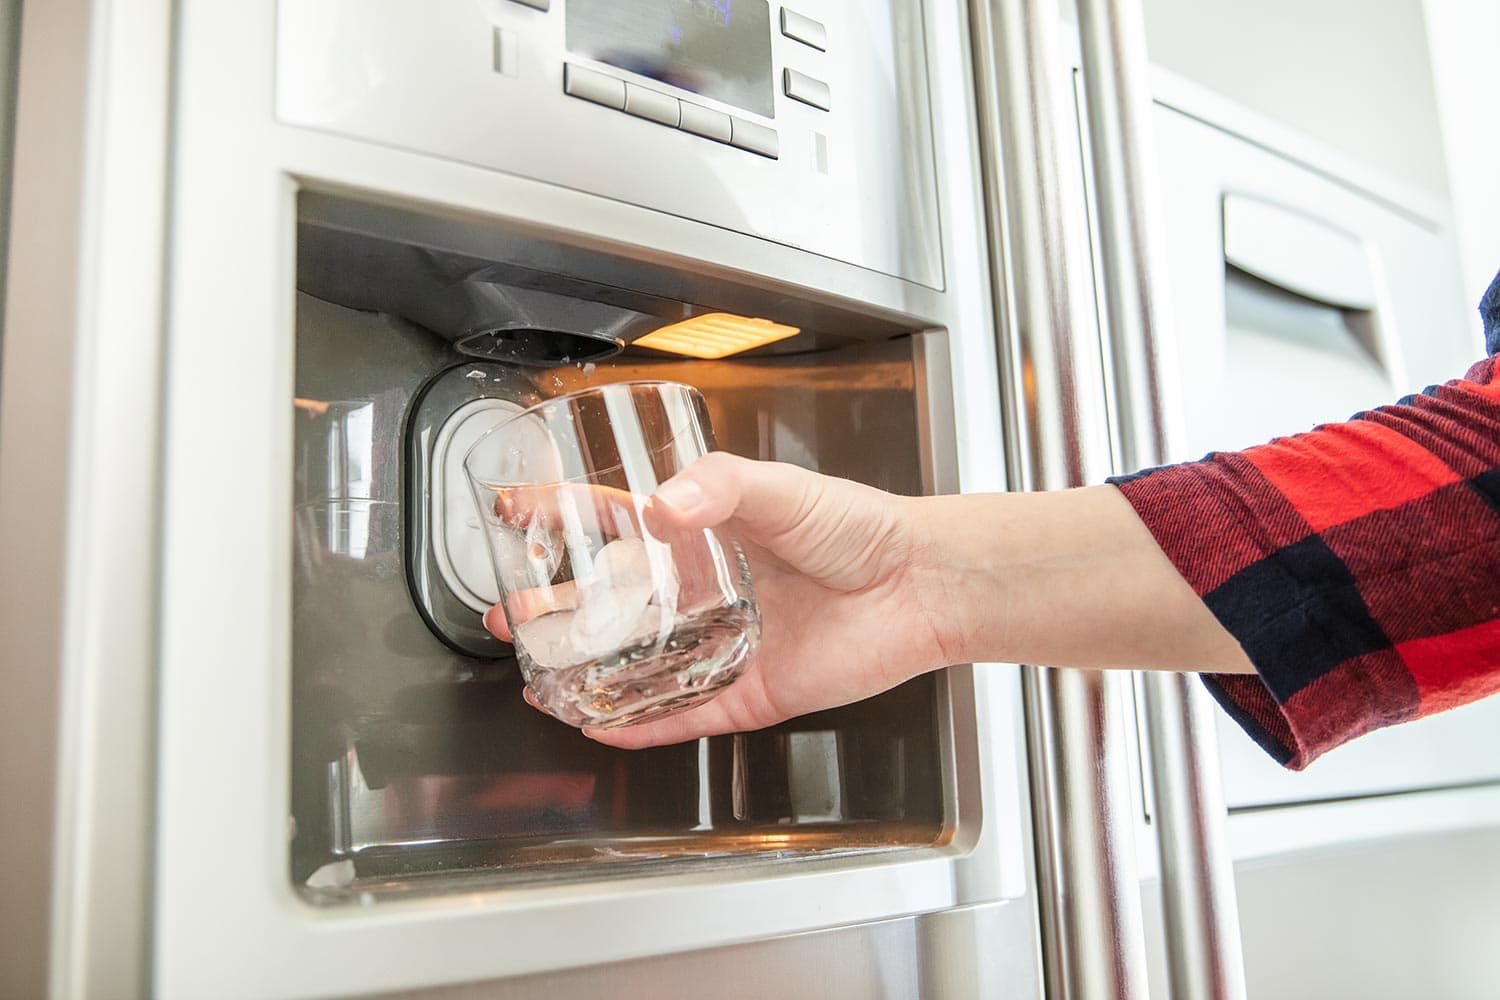 Woman's hand holds glass and uses refrigerator to make fresh clean ice cubes